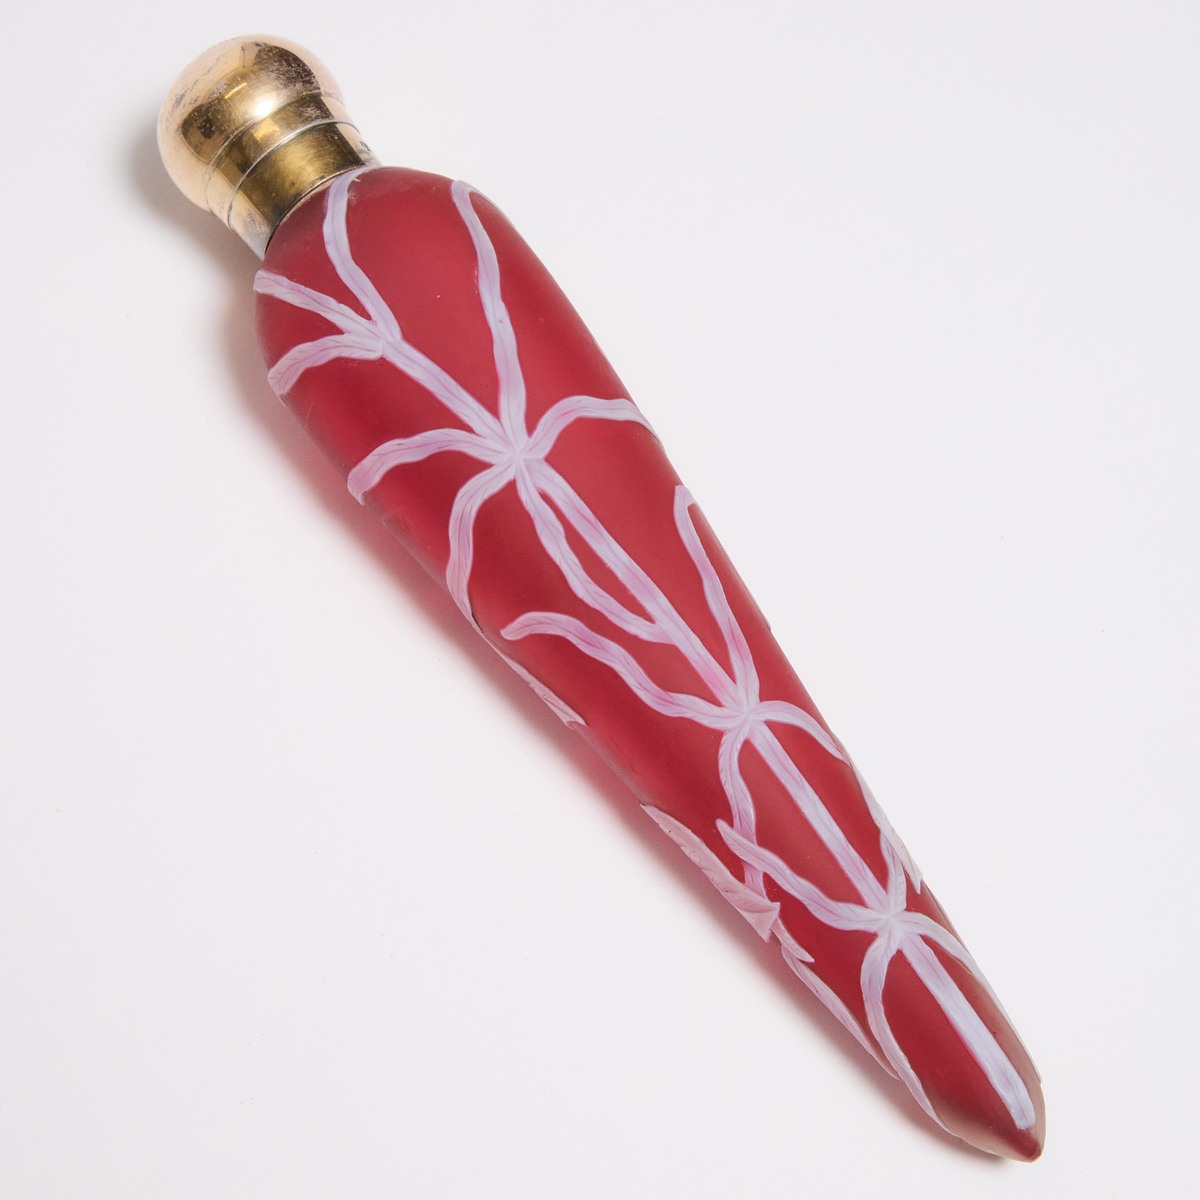 English Red Cameo Glass Perfume Bottle, probably Thomas Webb & Sons, 1880s, length 7.2 in — 18.2 cm - Image 2 of 2